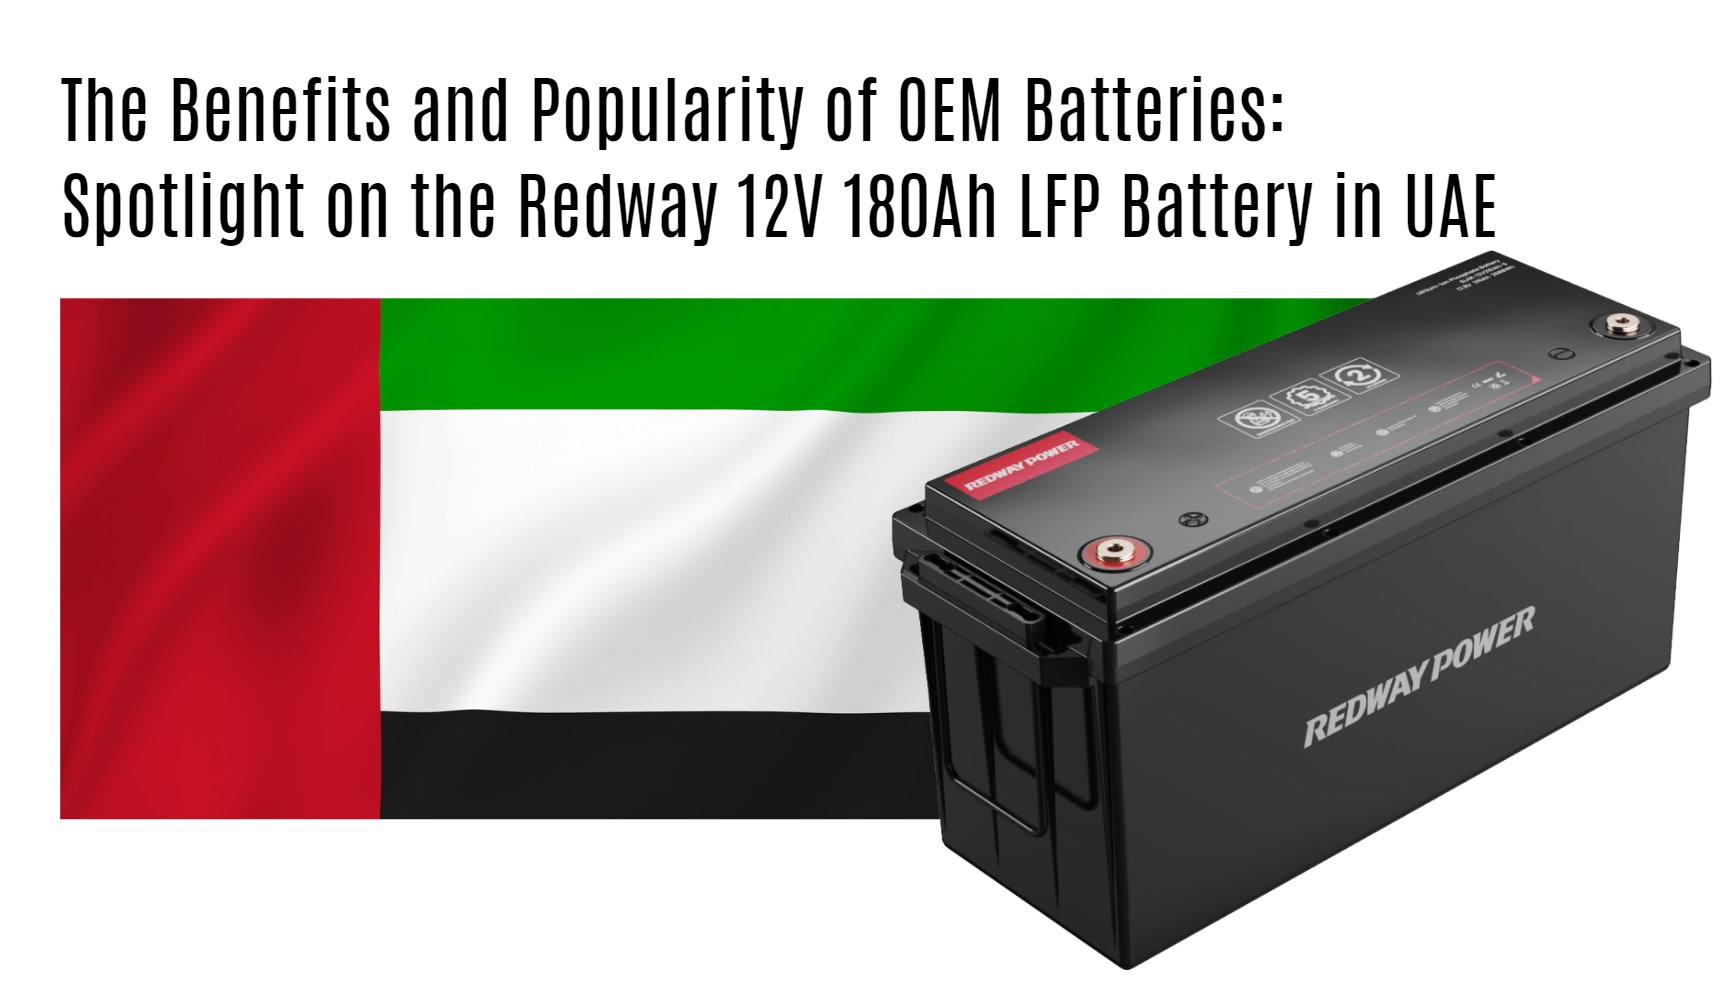 The Benefits and Popularity of OEM Batteries: Spotlight on the Redway 12V 180Ah LFP Battery in UAE